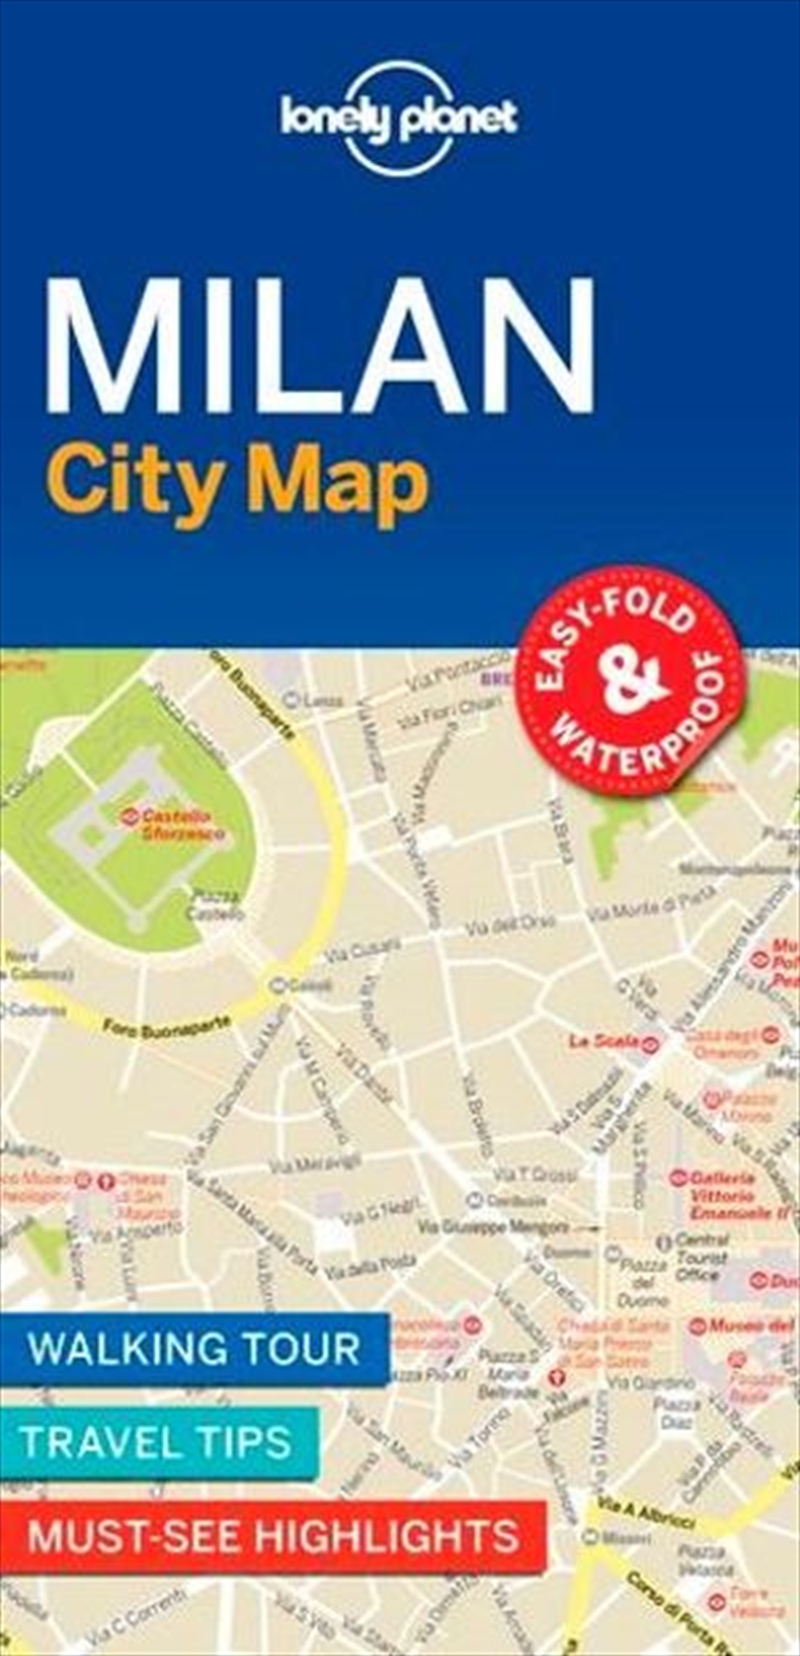 Lonely Planet Travel Guide - Milan City Map/Product Detail/Travel & Holidays